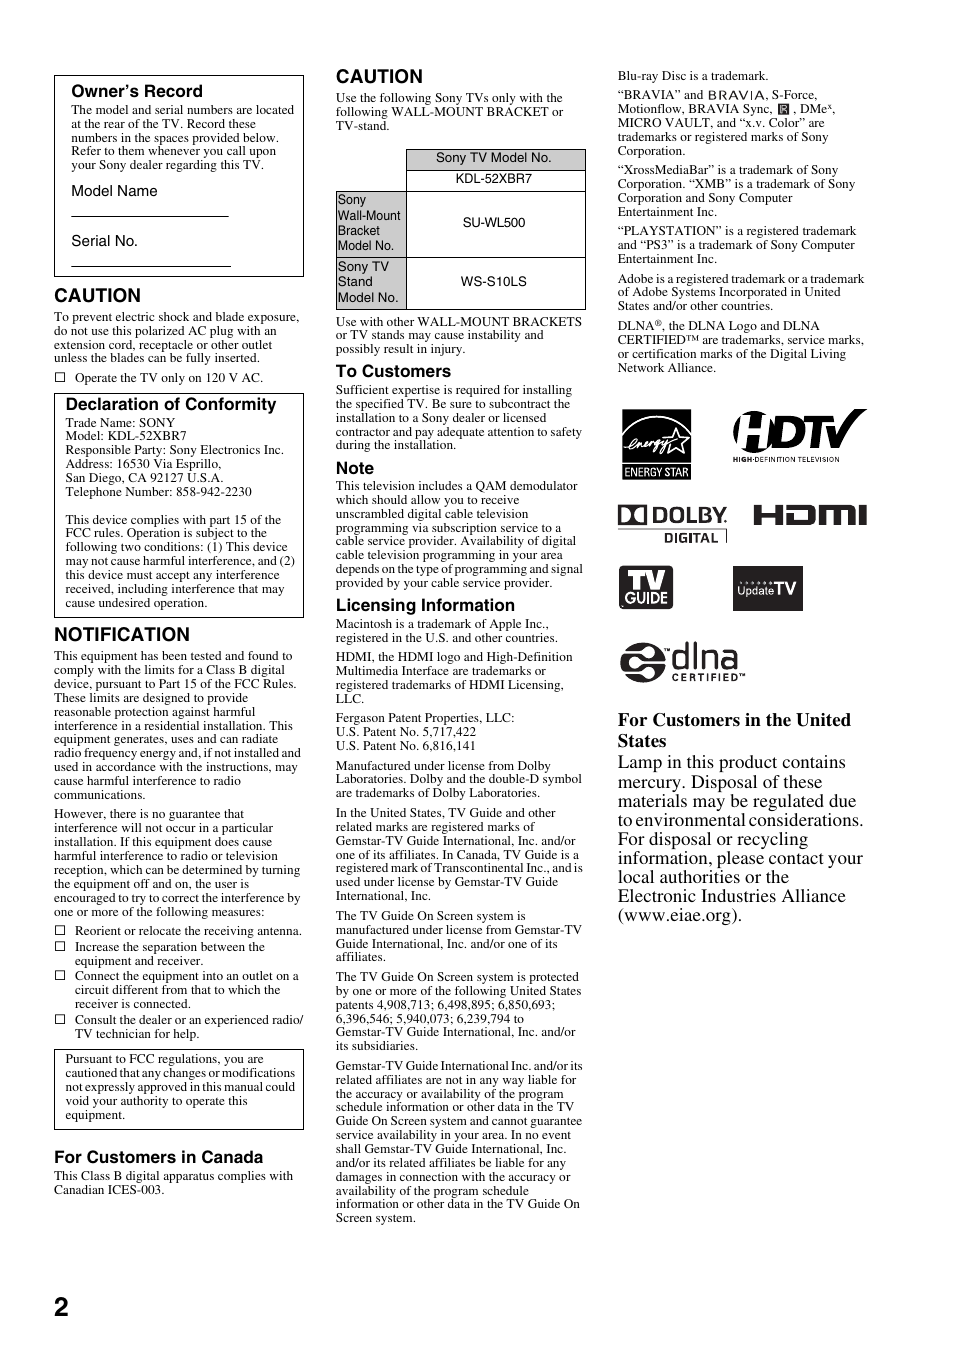 Caution, Notification | Sony KDL-52XBR7 User Manual | Page 2 / 60